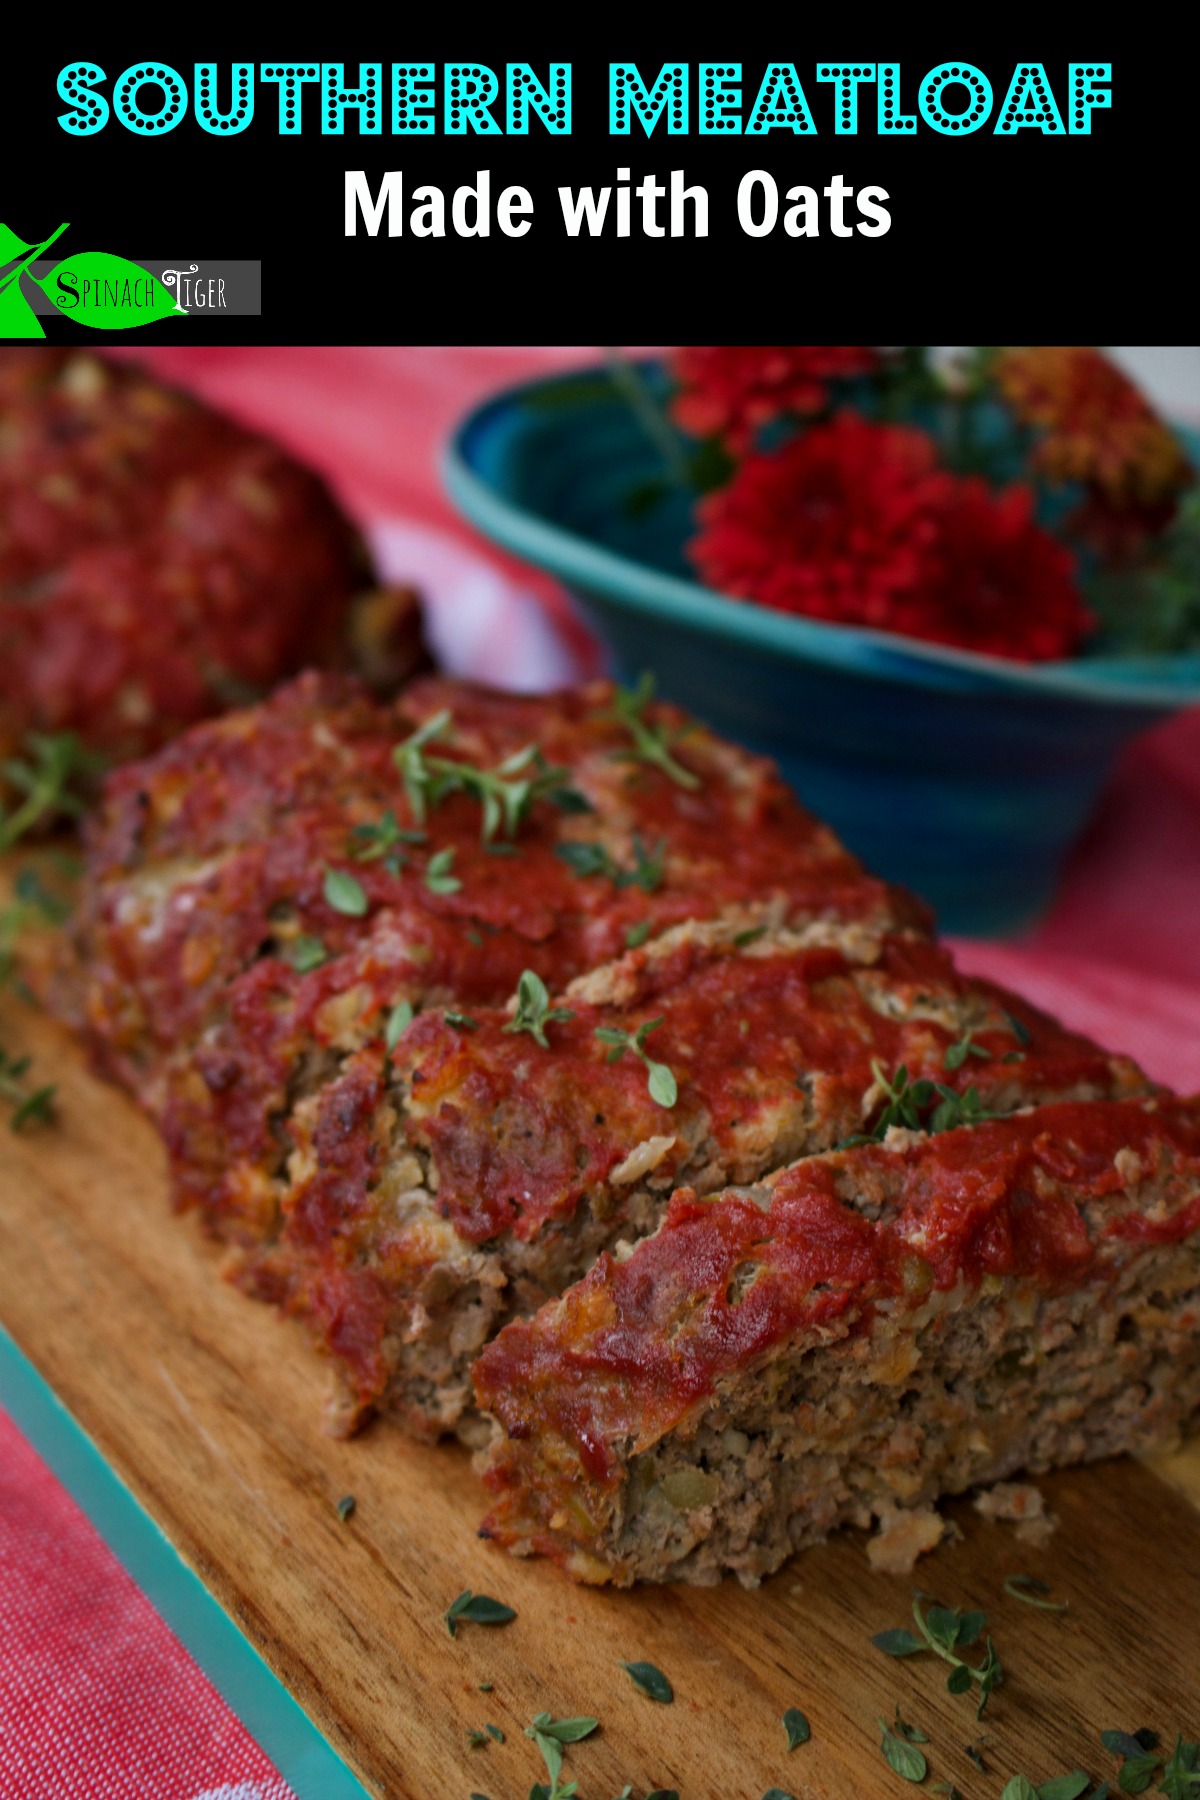 Big Fat Healthy Southern Meatloaf Recipe, Made with Oats - Spinach Tiger